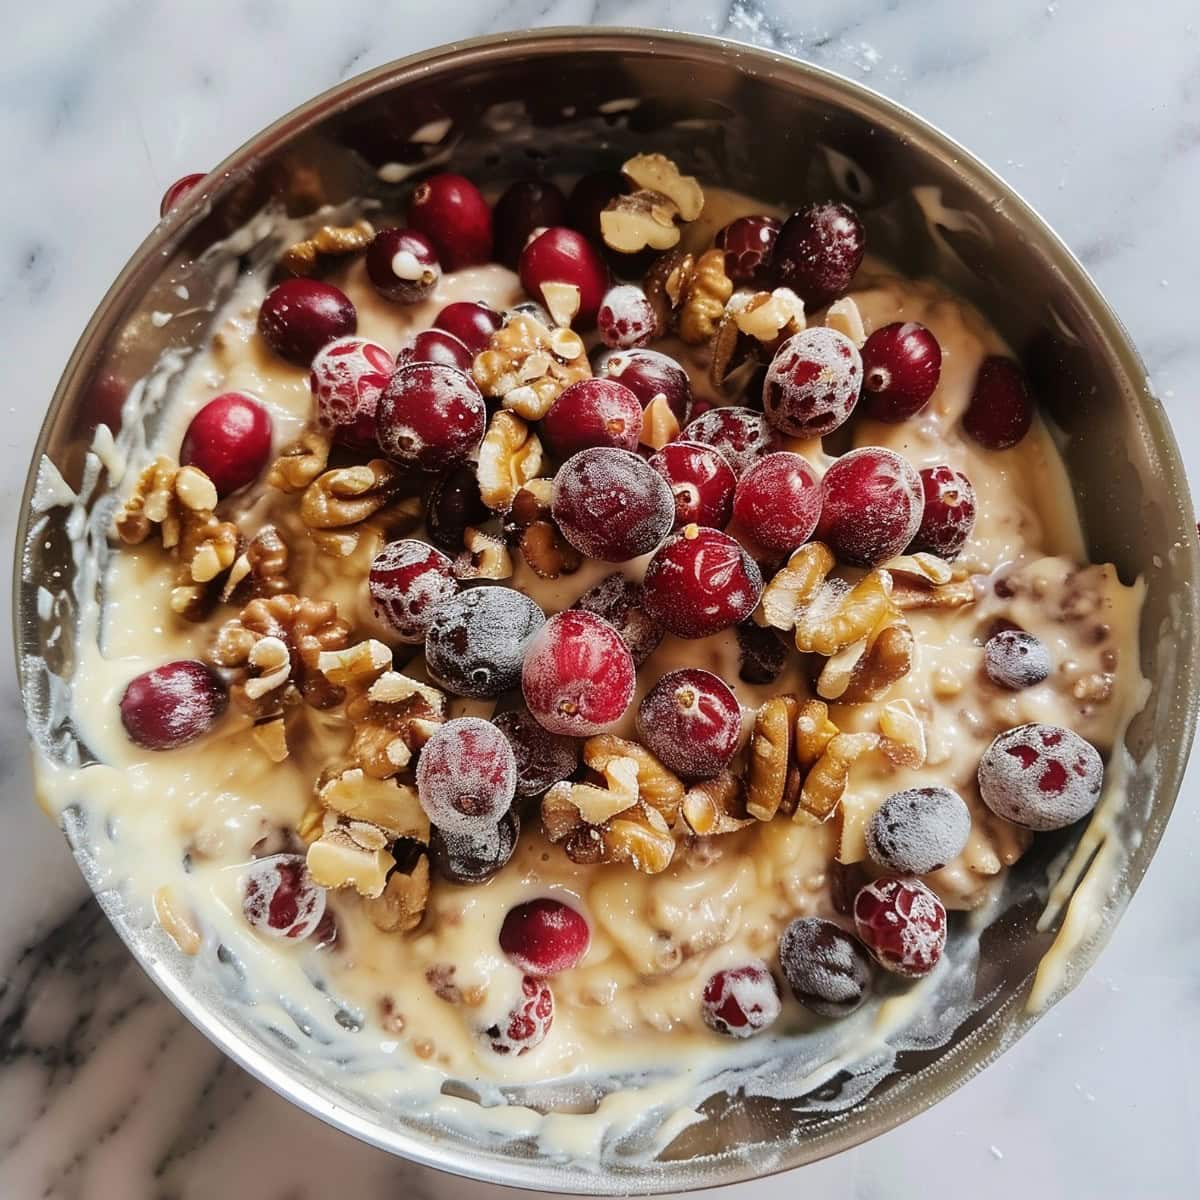 Cranberry Orange Bread Batter with Whole Cranberries and Walnuts in a Bowl on a White Marble Table